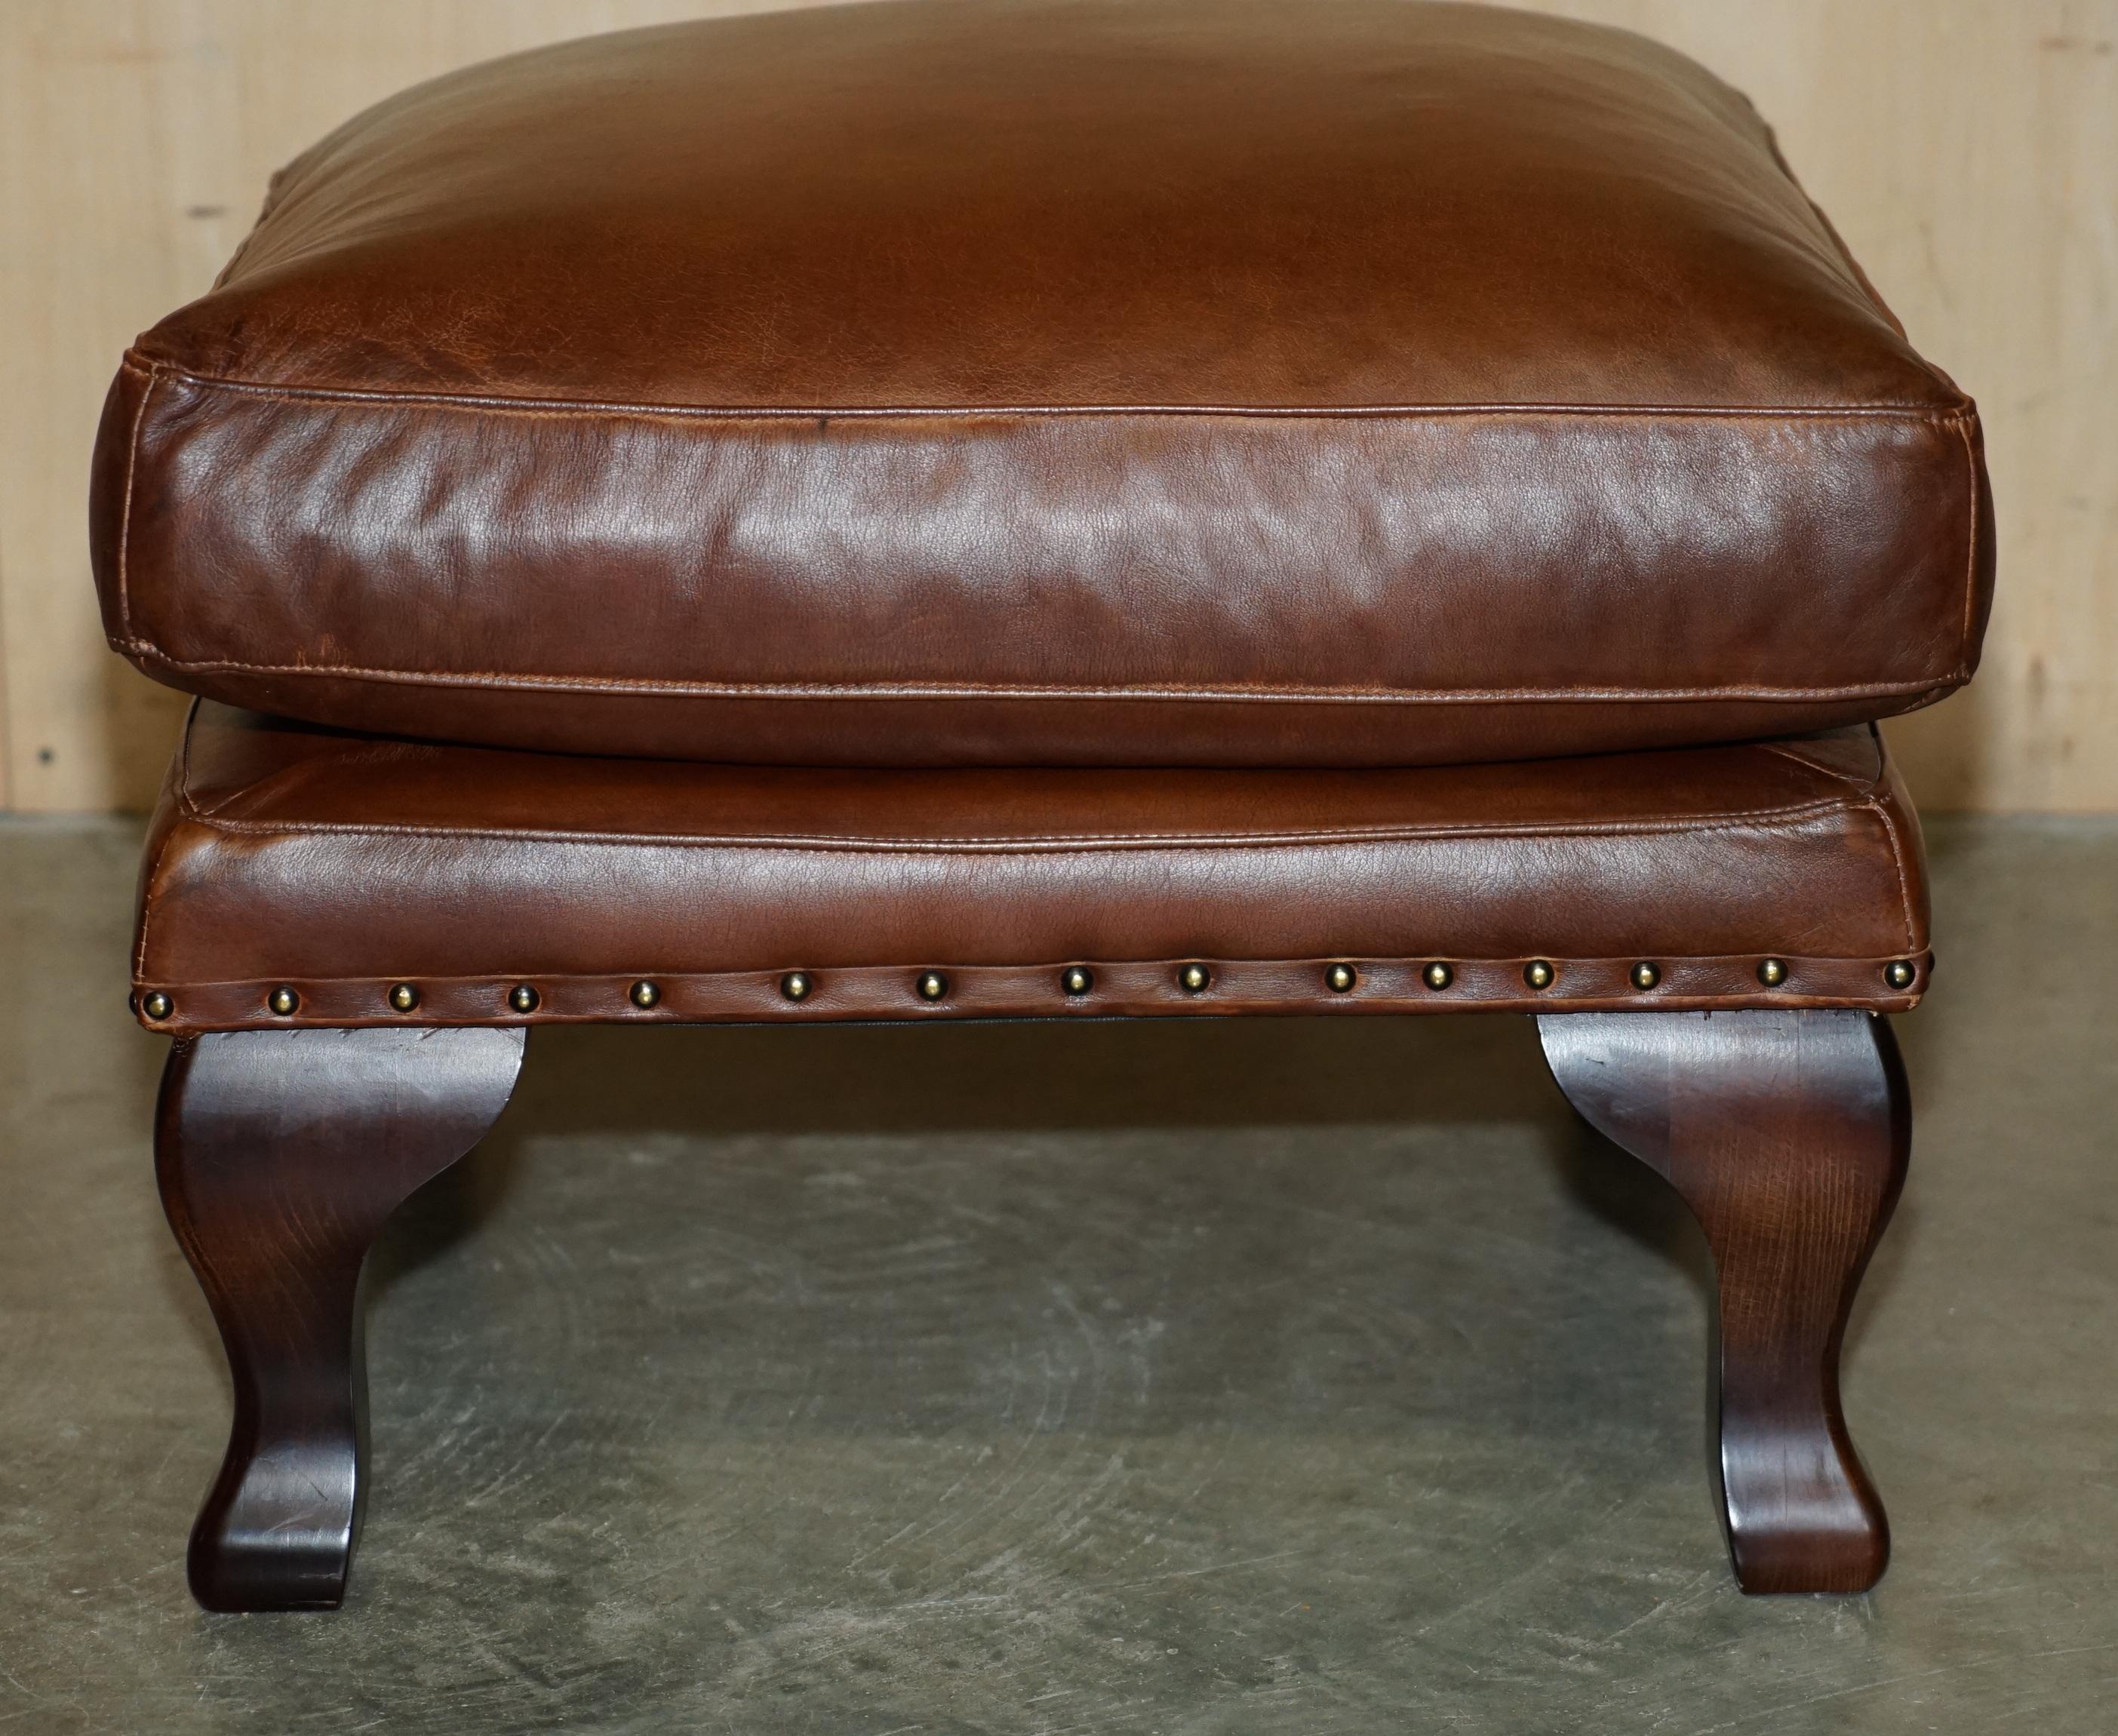 TETRAD BROWN LEATHER LARGE FOOTSTOOL LARGE ENoUGH FOR TWO PEOPLE TO SHARE im Angebot 2